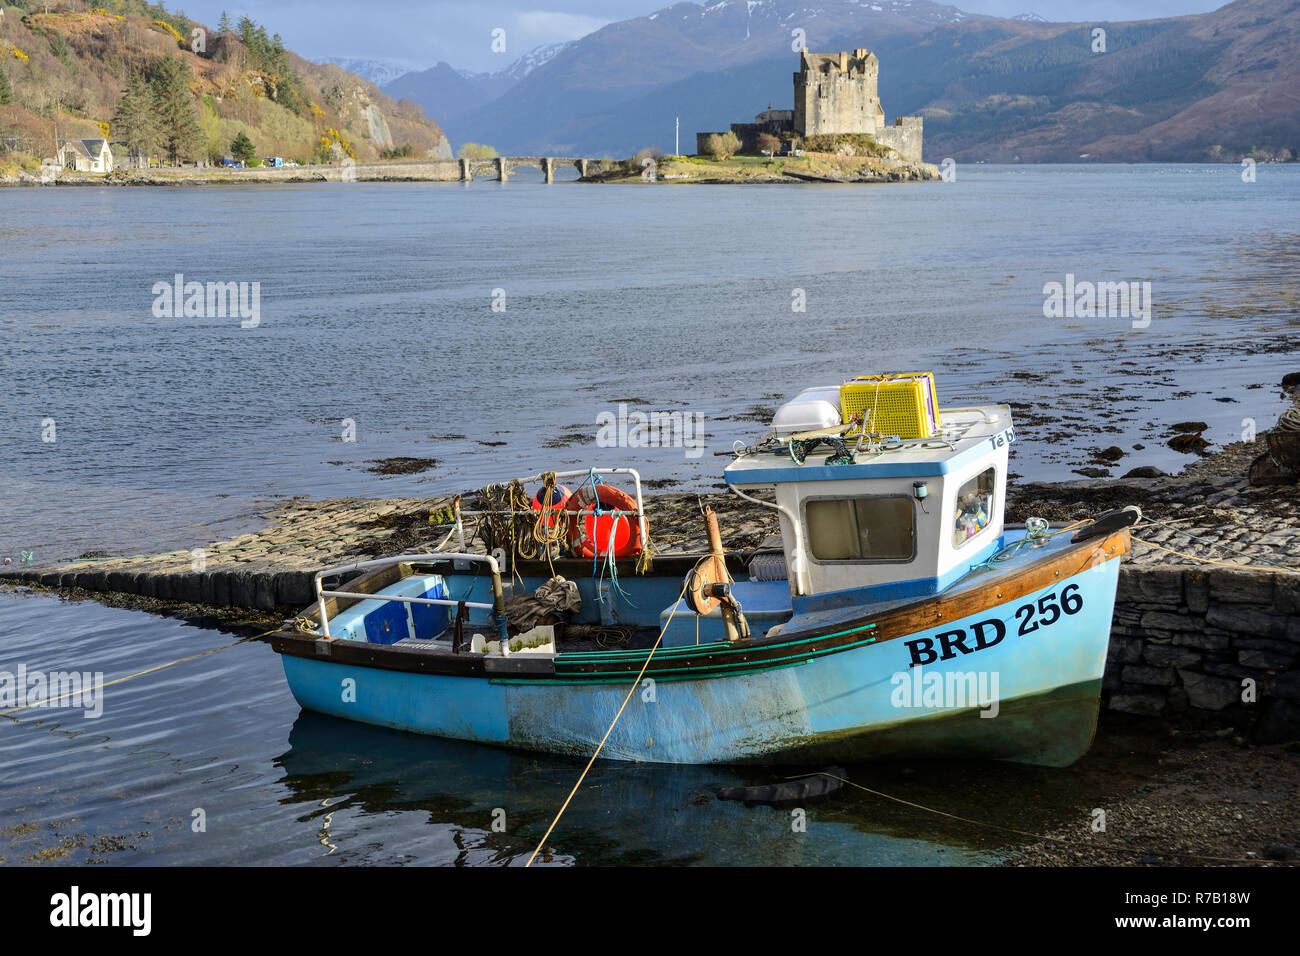 Fishing boat and Eilean Donan Castle at conjuction of Loch Duich, Loch Alsh and Loch Long near Dornie in Wester Ross, Highland Region, Scotland Stock Photo